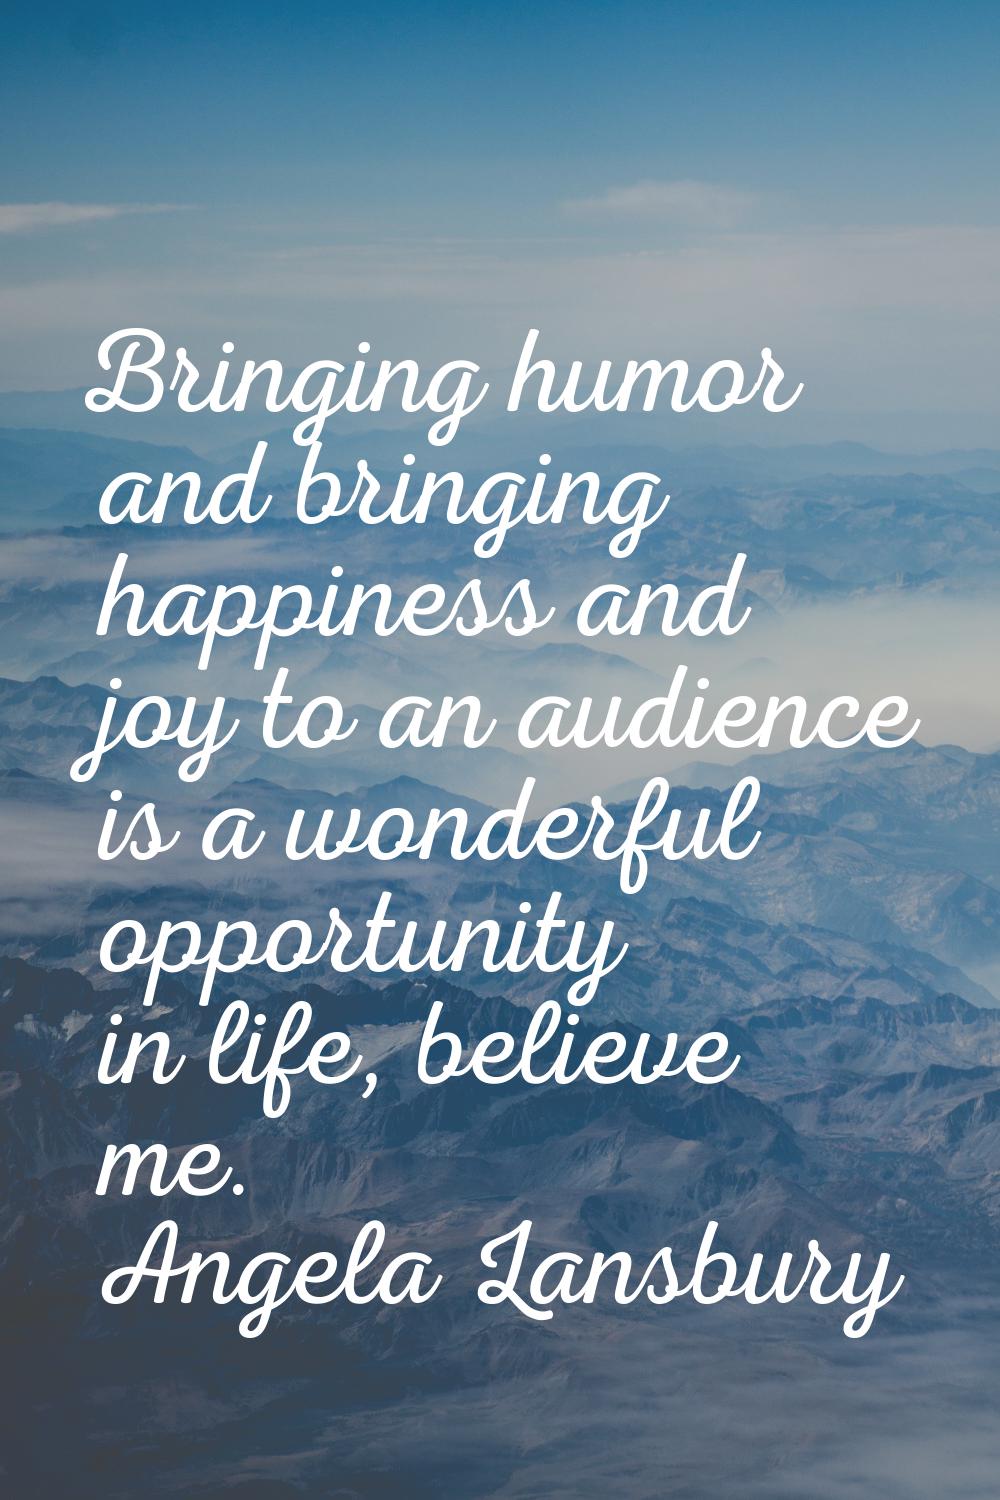 Bringing humor and bringing happiness and joy to an audience is a wonderful opportunity in life, be